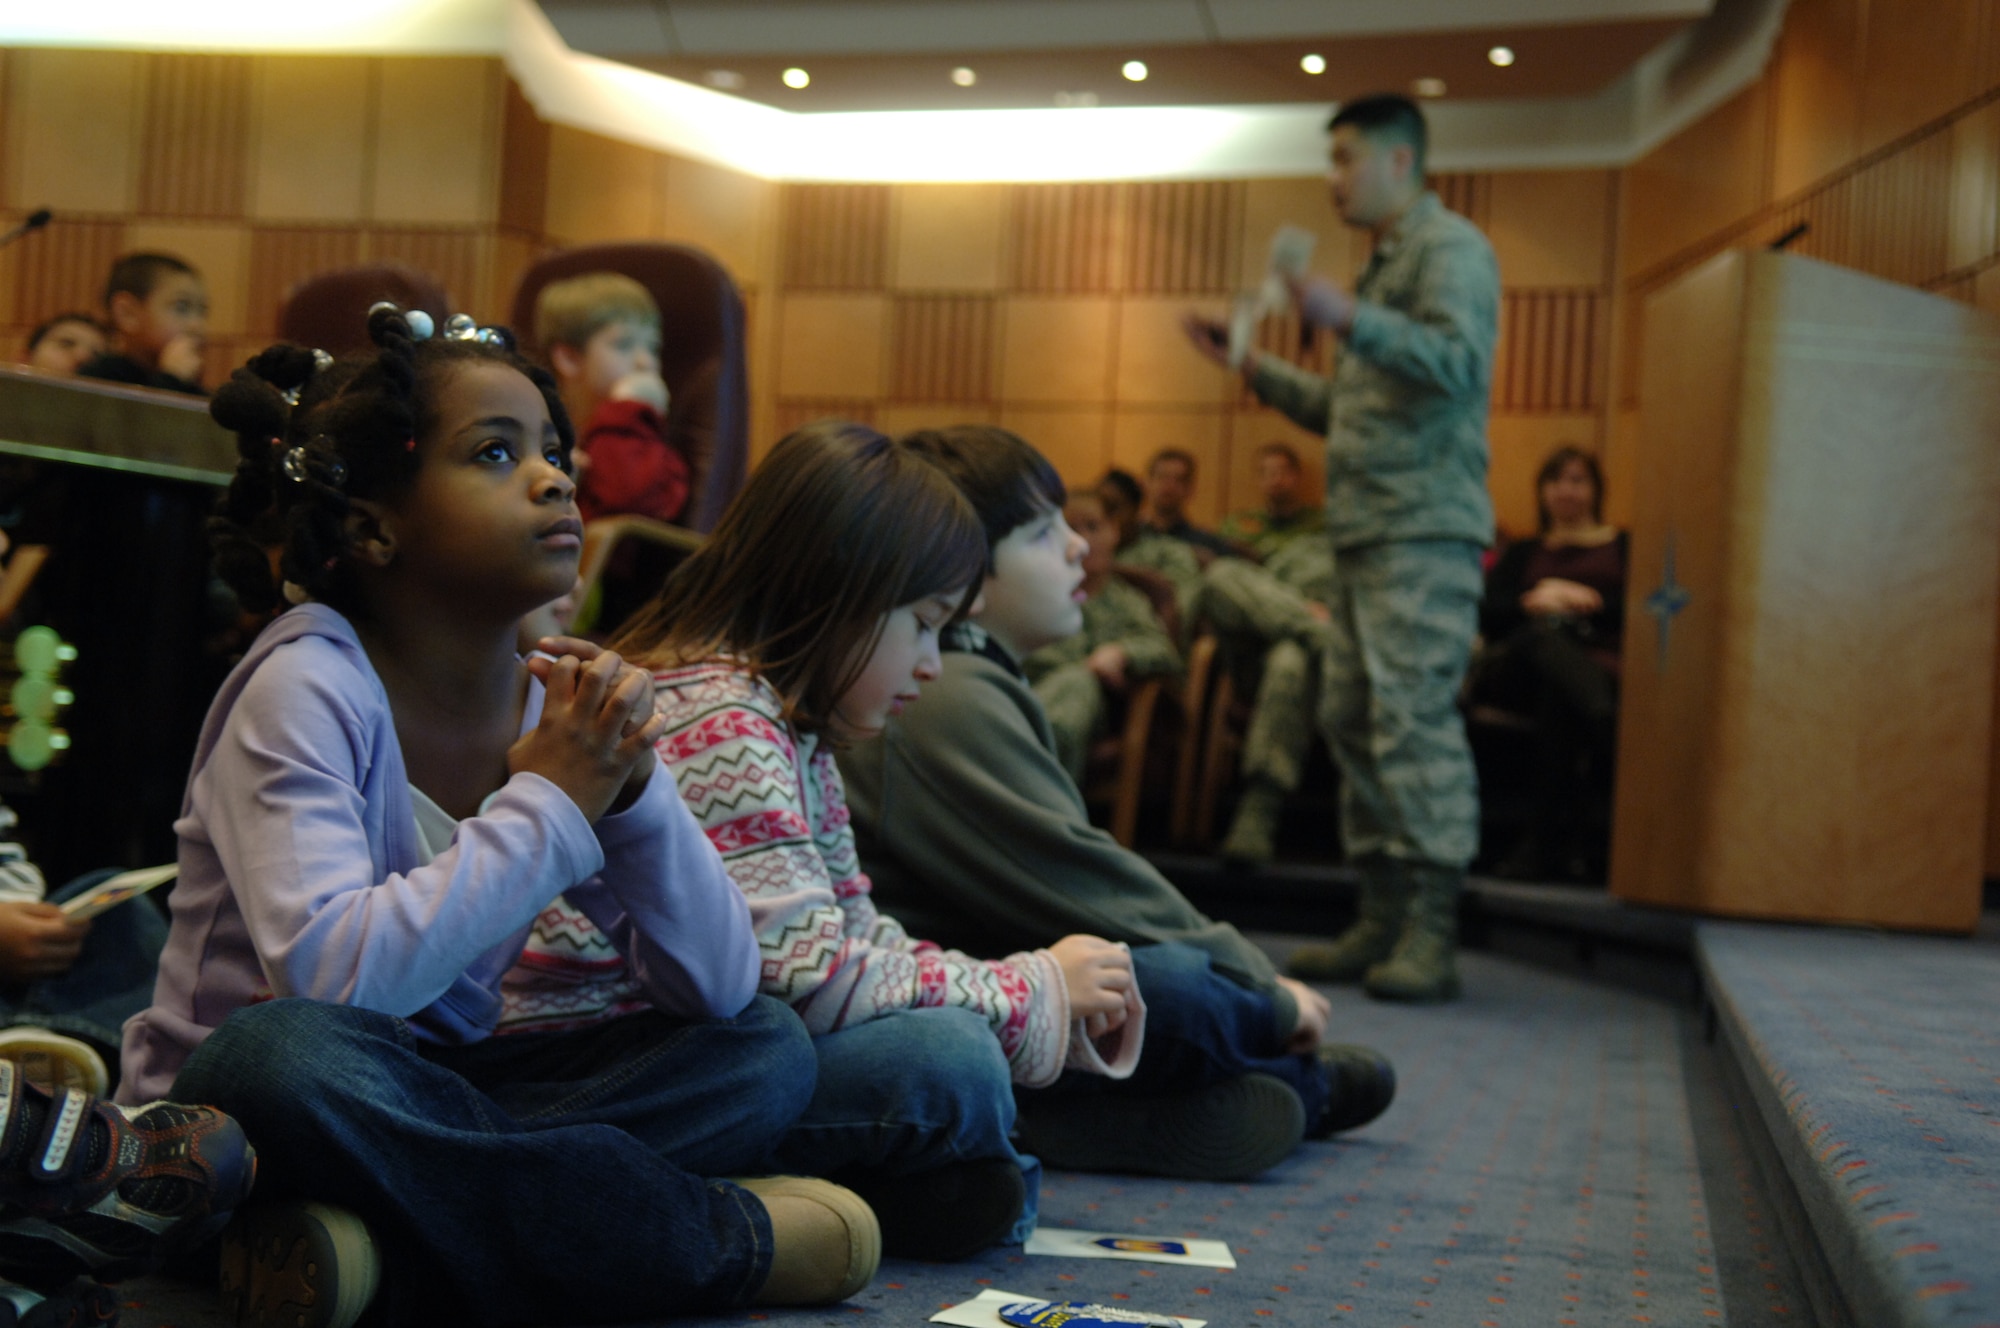 School children listen to a briefing about the history and mission of the U.S. Air Forces in Europe during Job Shadow Day Feb. 5, 2009, at Ramstein Air Base. Job Shadow Day is a nationwide effort to introduce young people to the working community through active participation.(U.S. Air Force photo by Senior Airman Levi Riendeau)